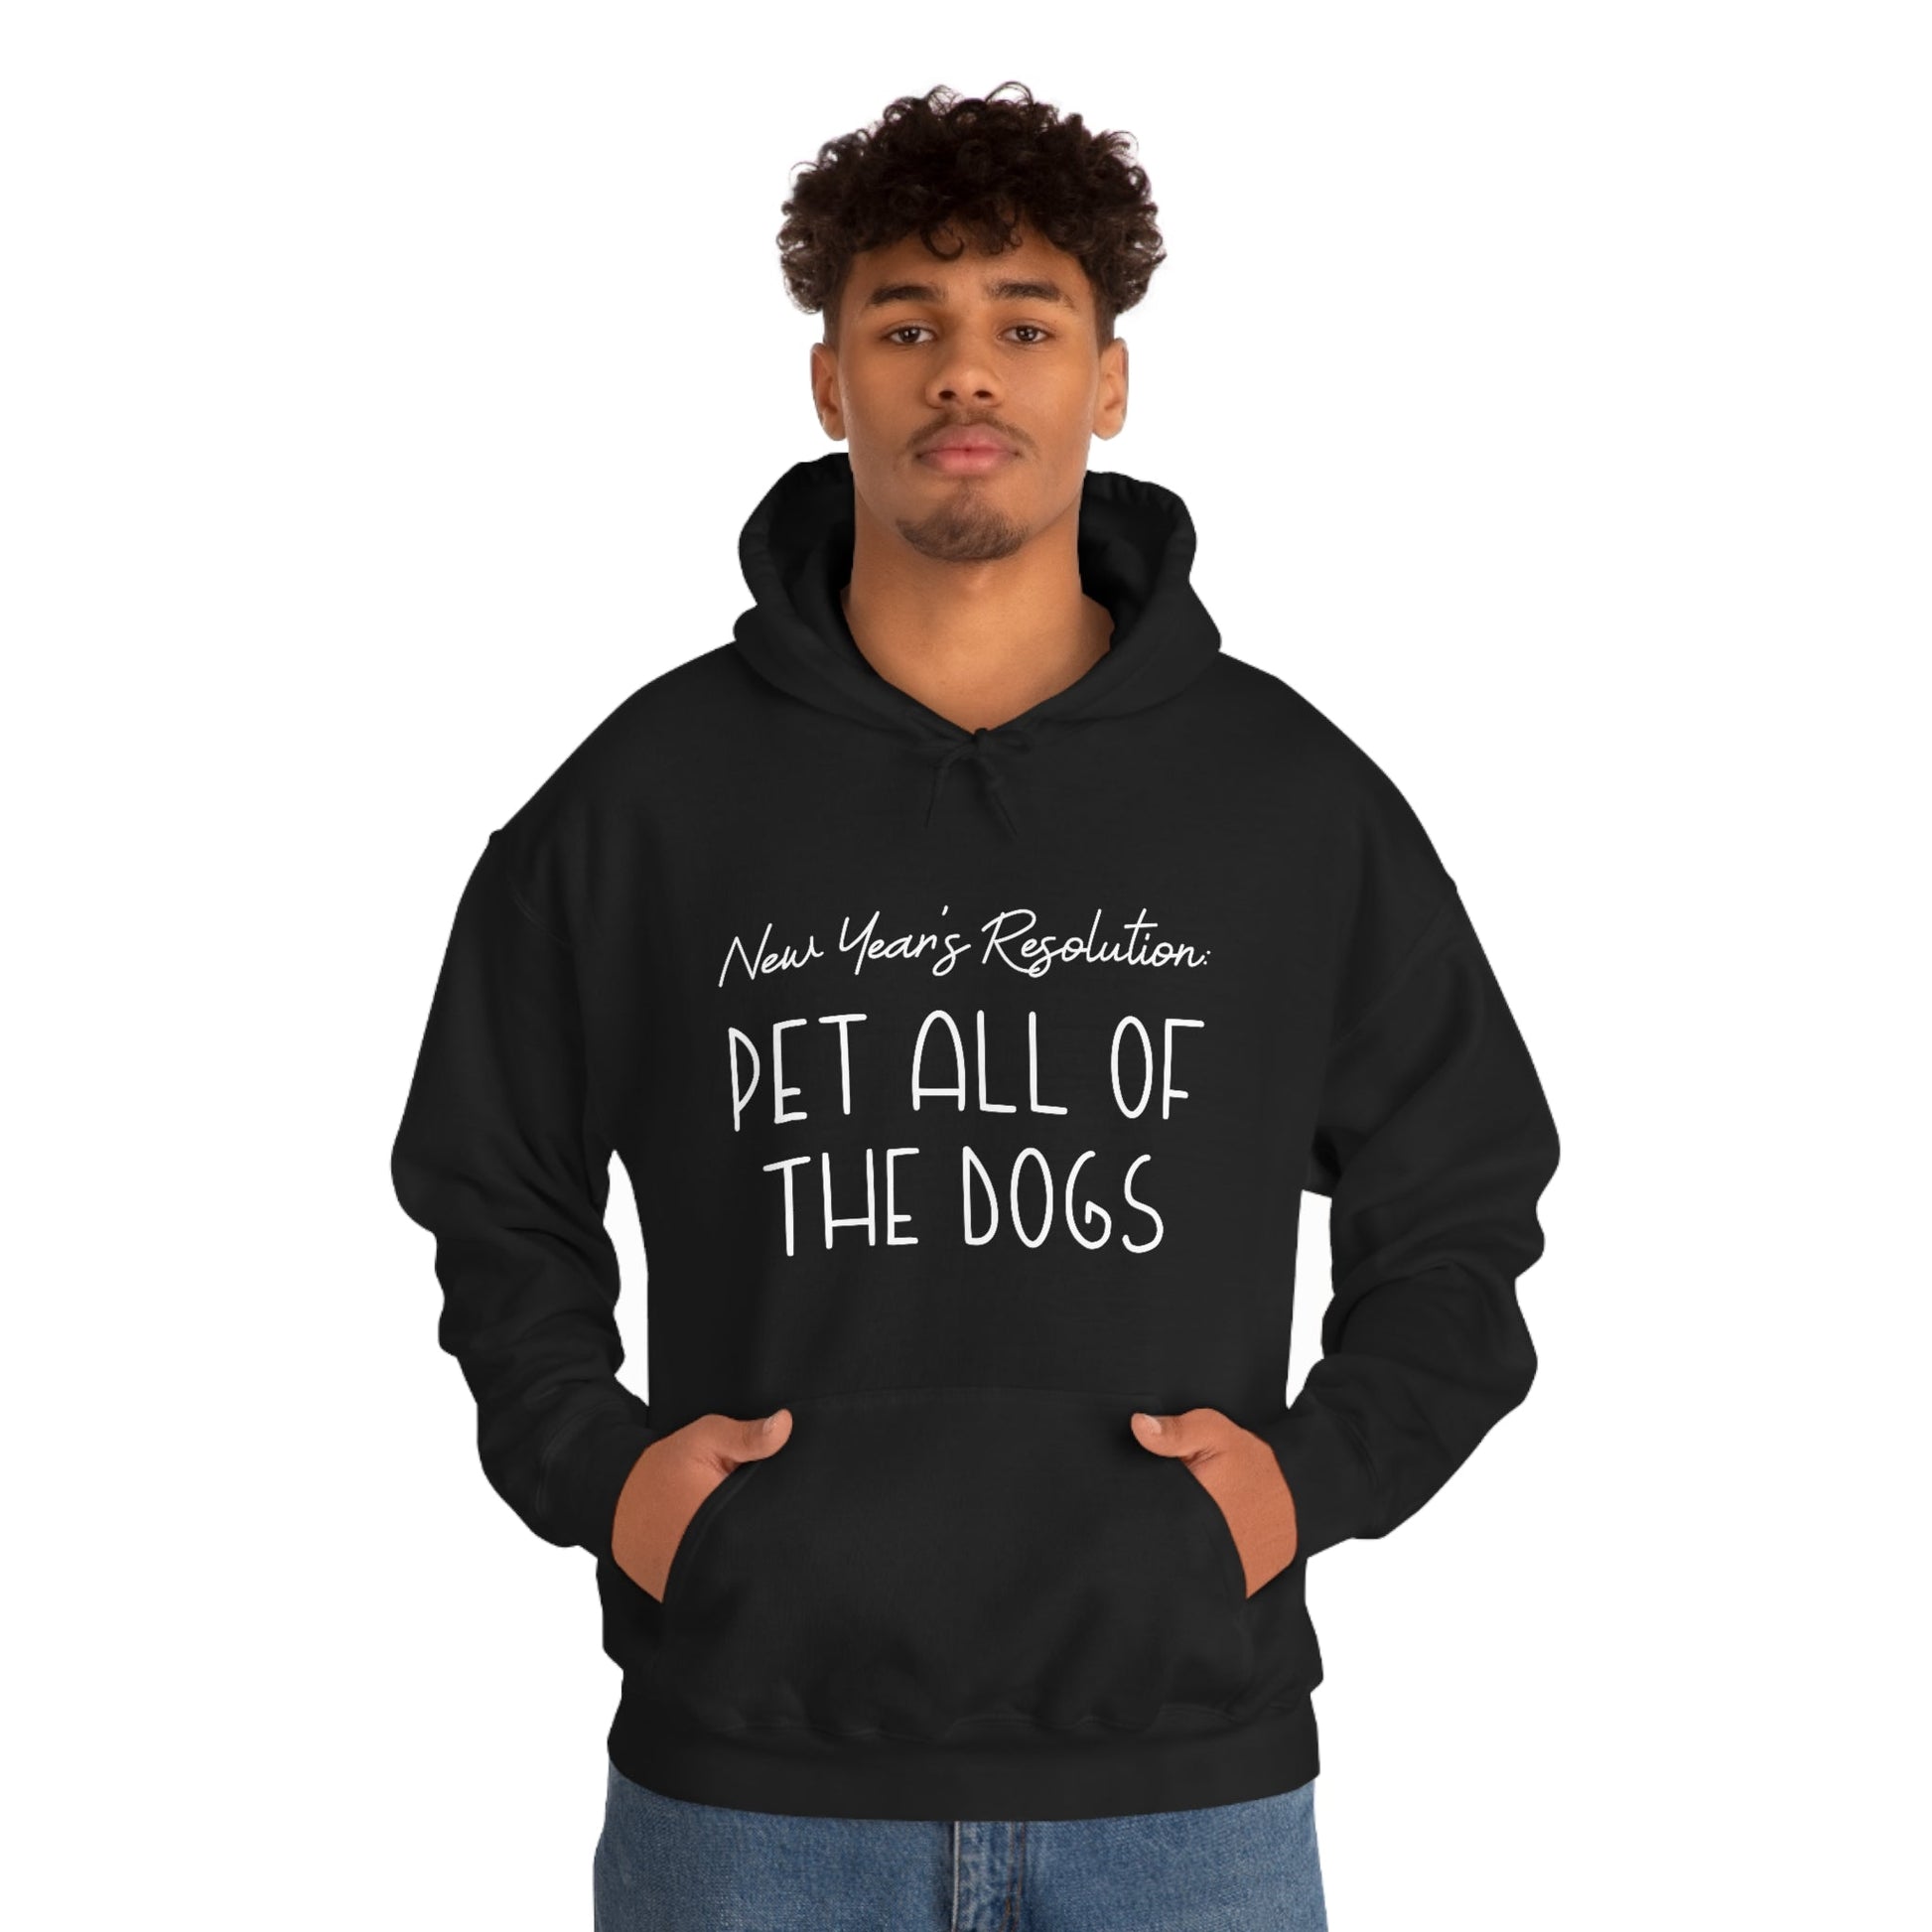 New Year's Resolution: Pet All Of The Dogs | Hooded Sweatshirt - Detezi Designs-19336405798840047278